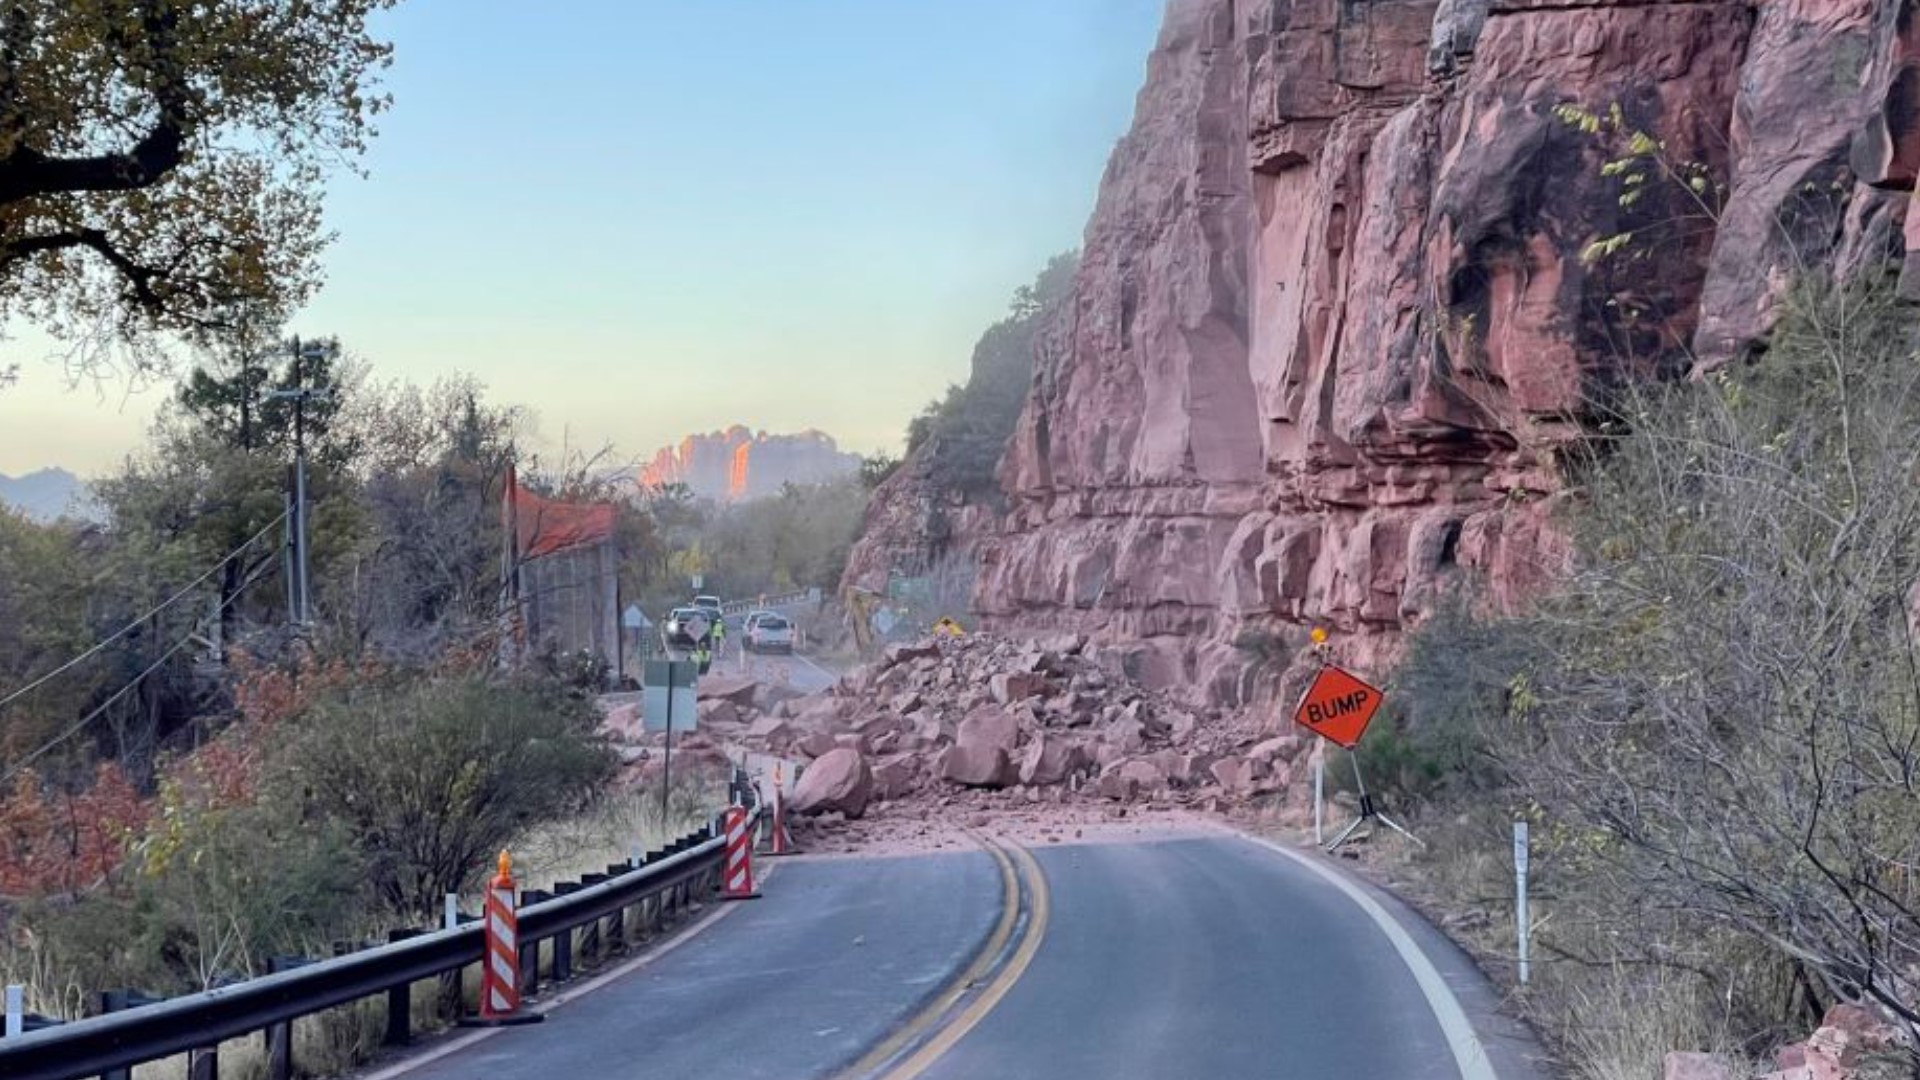 State Route 89A north of Sedona will remain closed until crews can clean up after rock blasting.